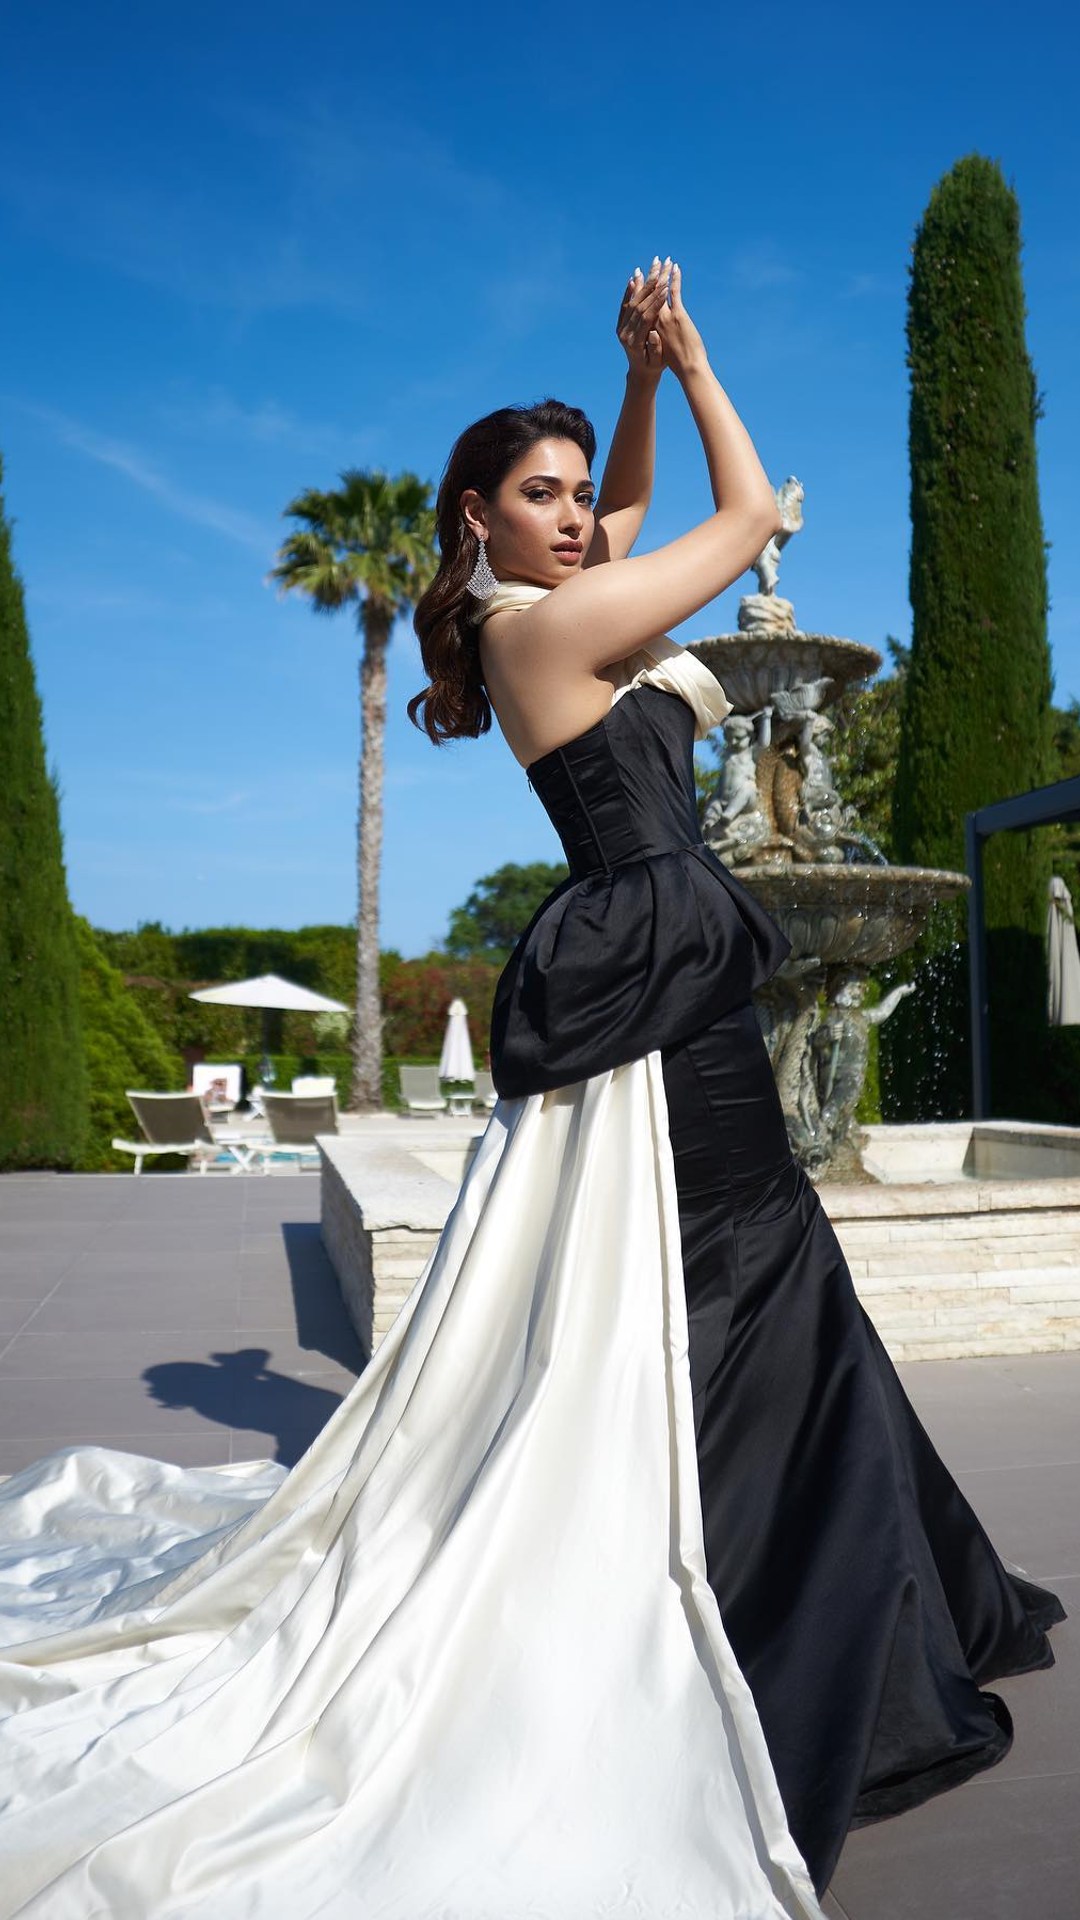 Black And White Evening Dress - June Bridals